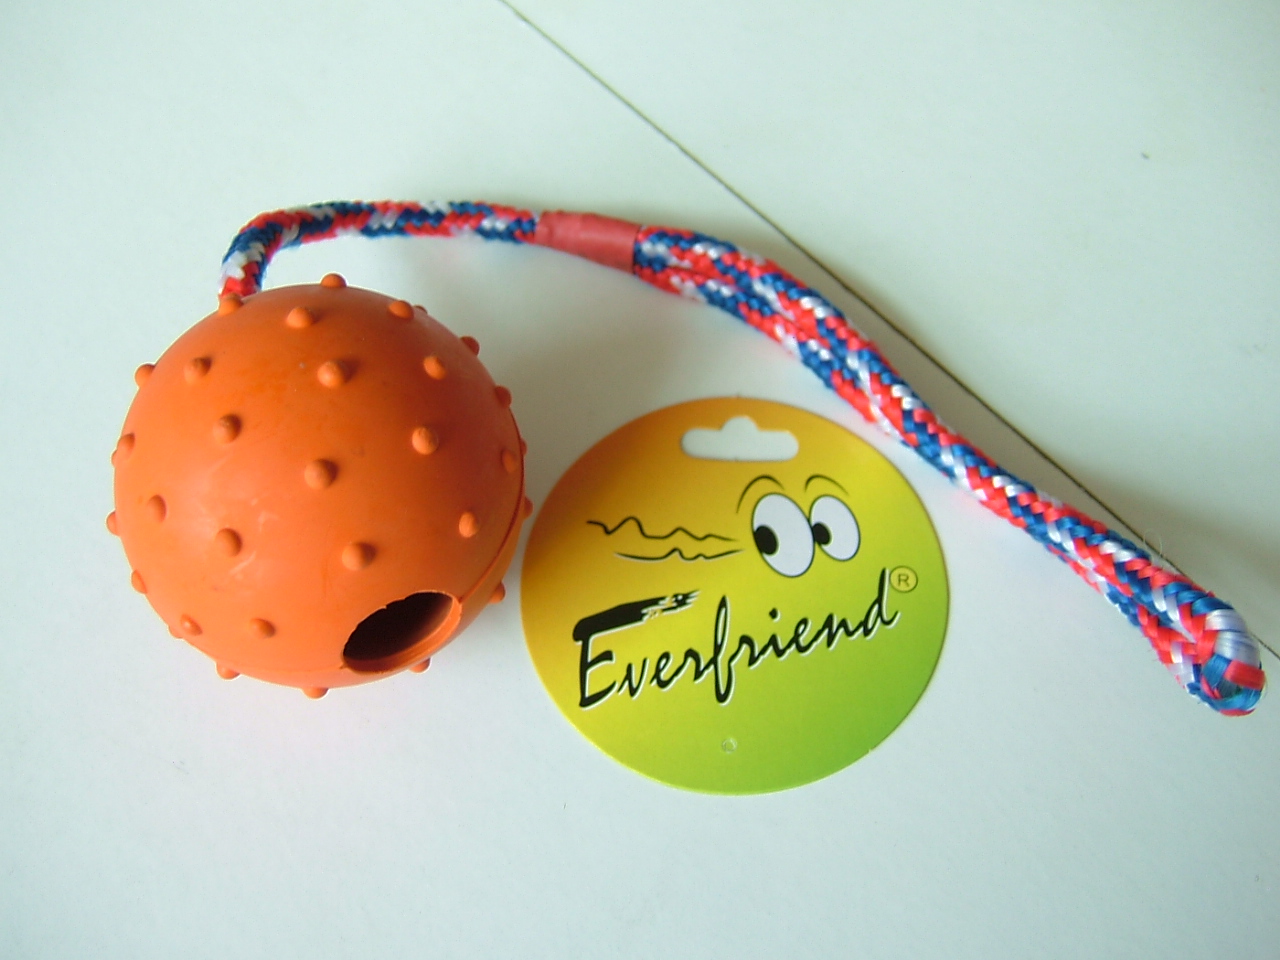 spikey small rubber ball toy